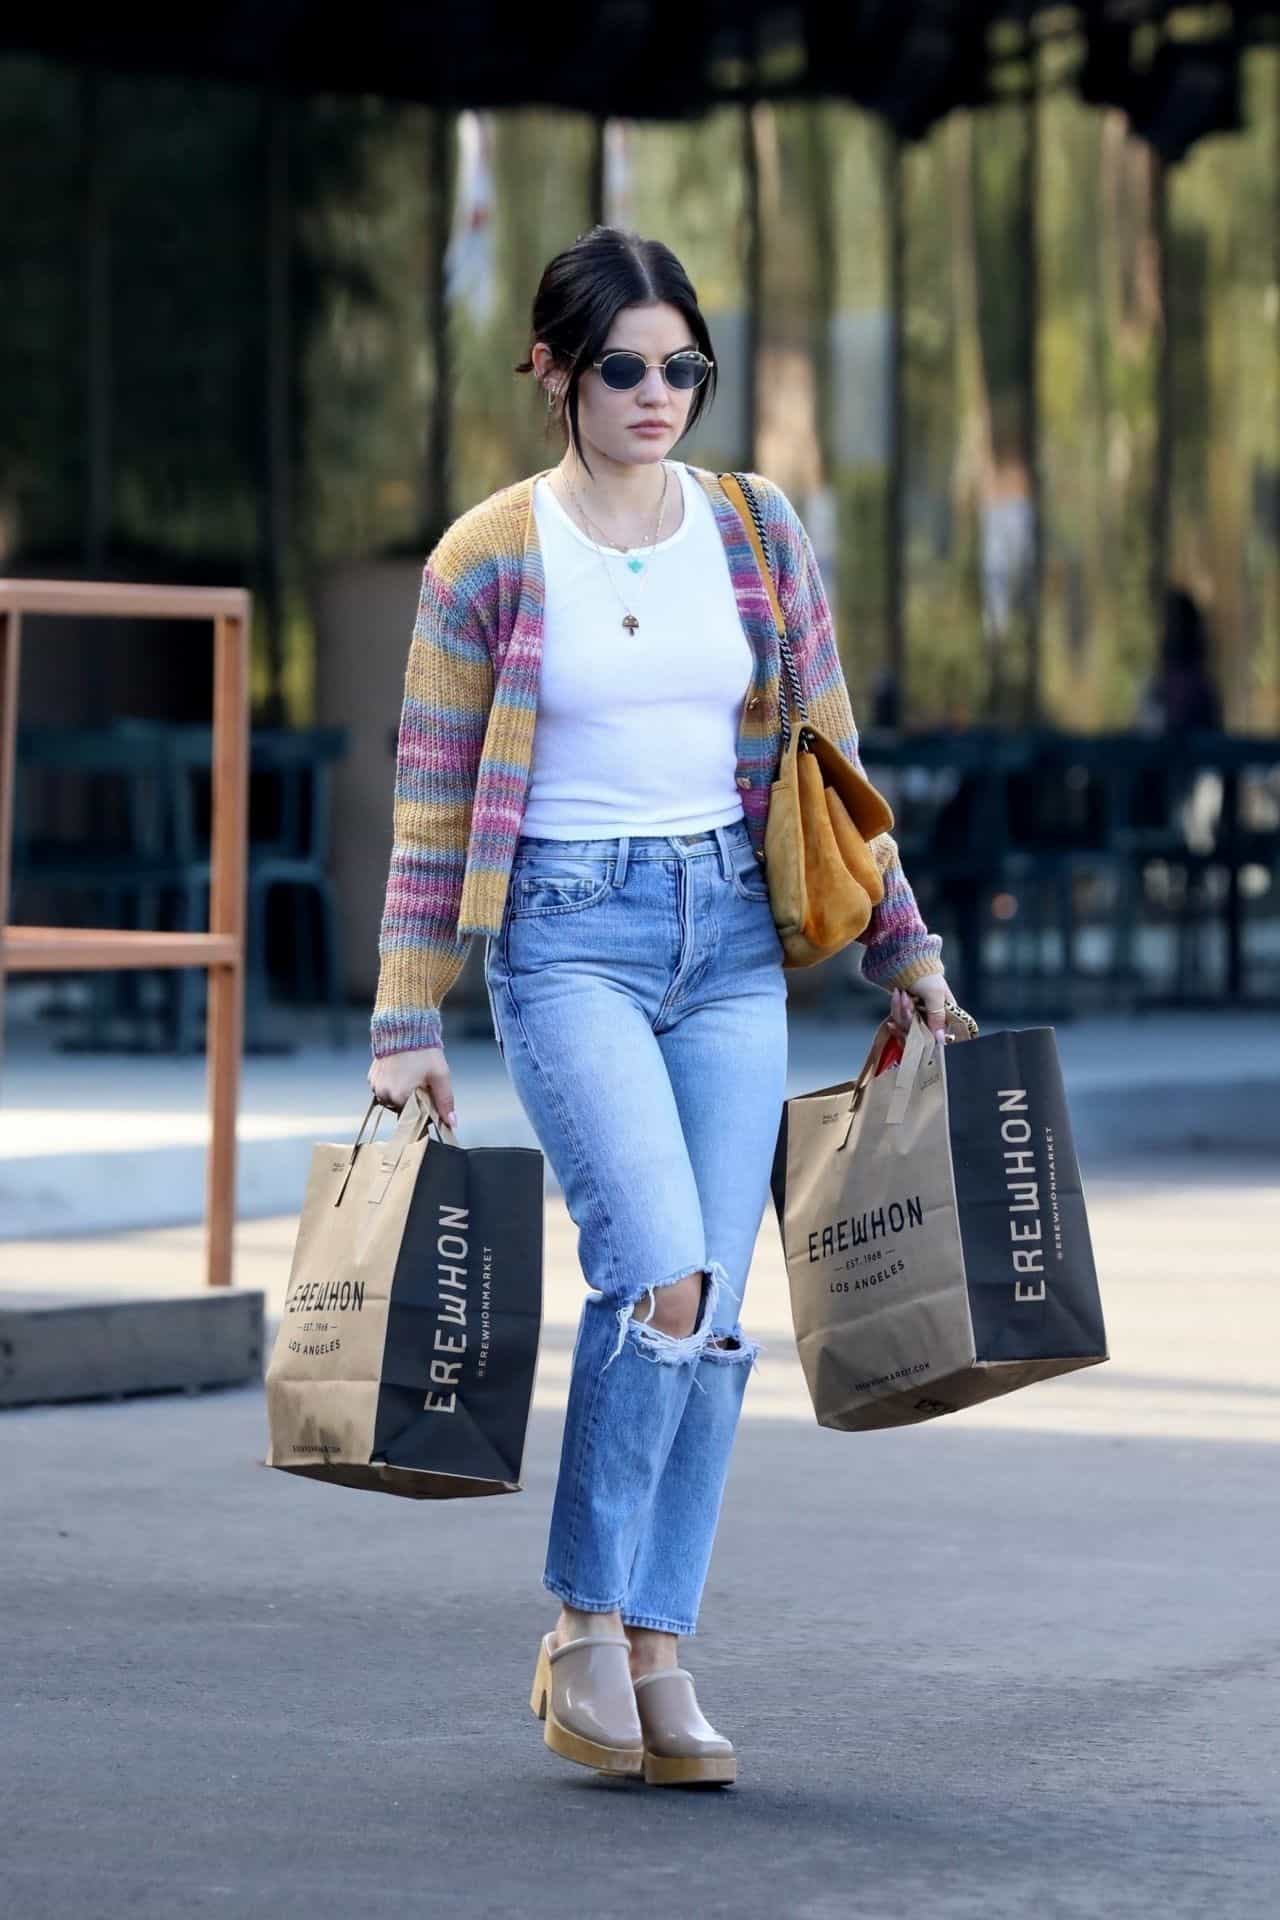 Lucy Hale Goes Bra-free to the Local Erewhon Market to Pick Up Groceries